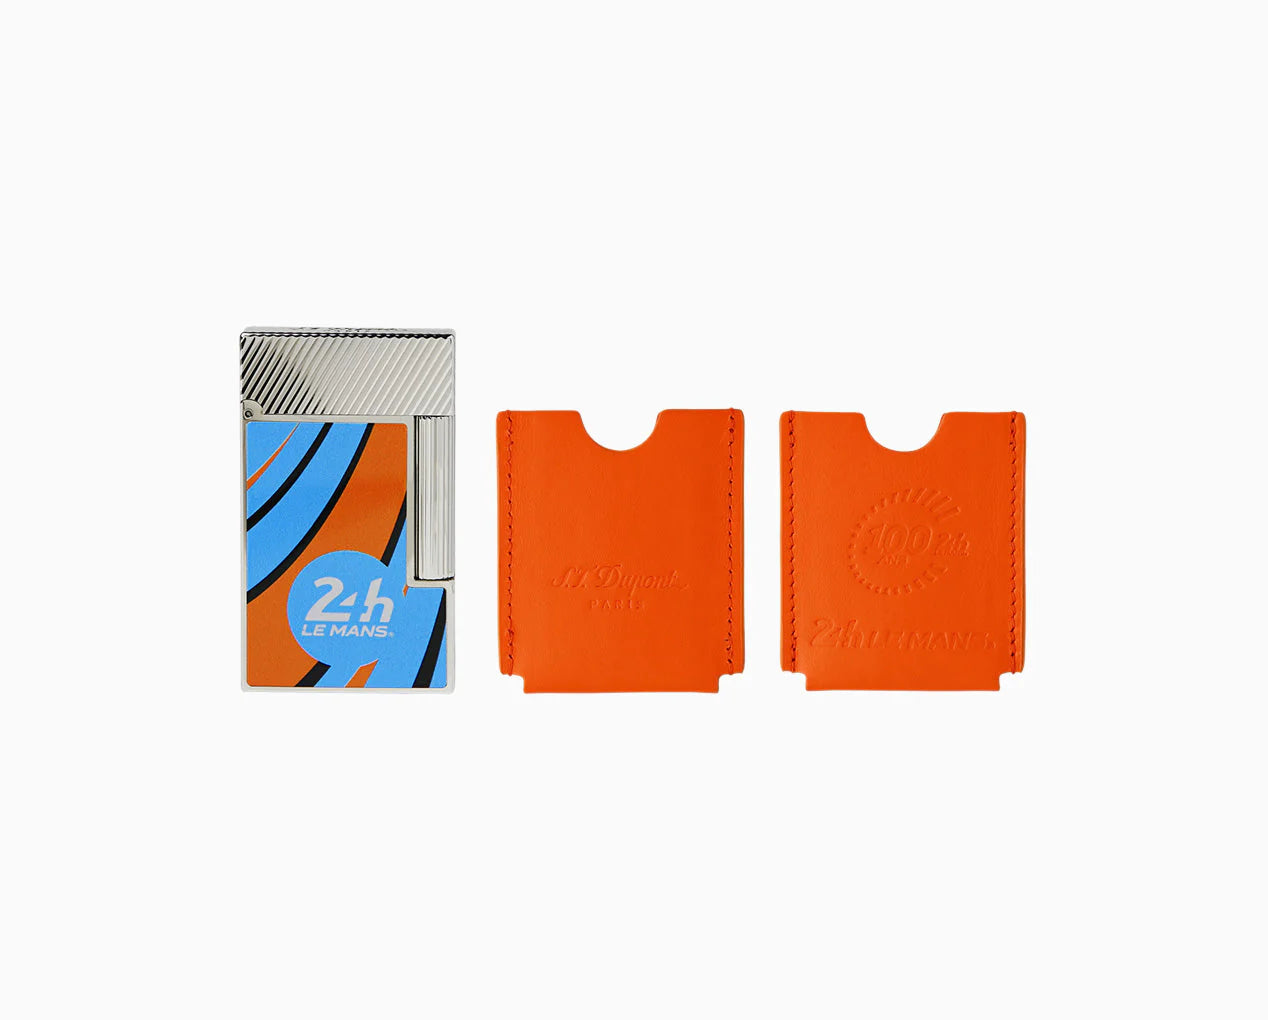 A pair of limited edition S.T. Dupont Line 2 Le Mans 24 Hour Lighter cases in orange and blue.